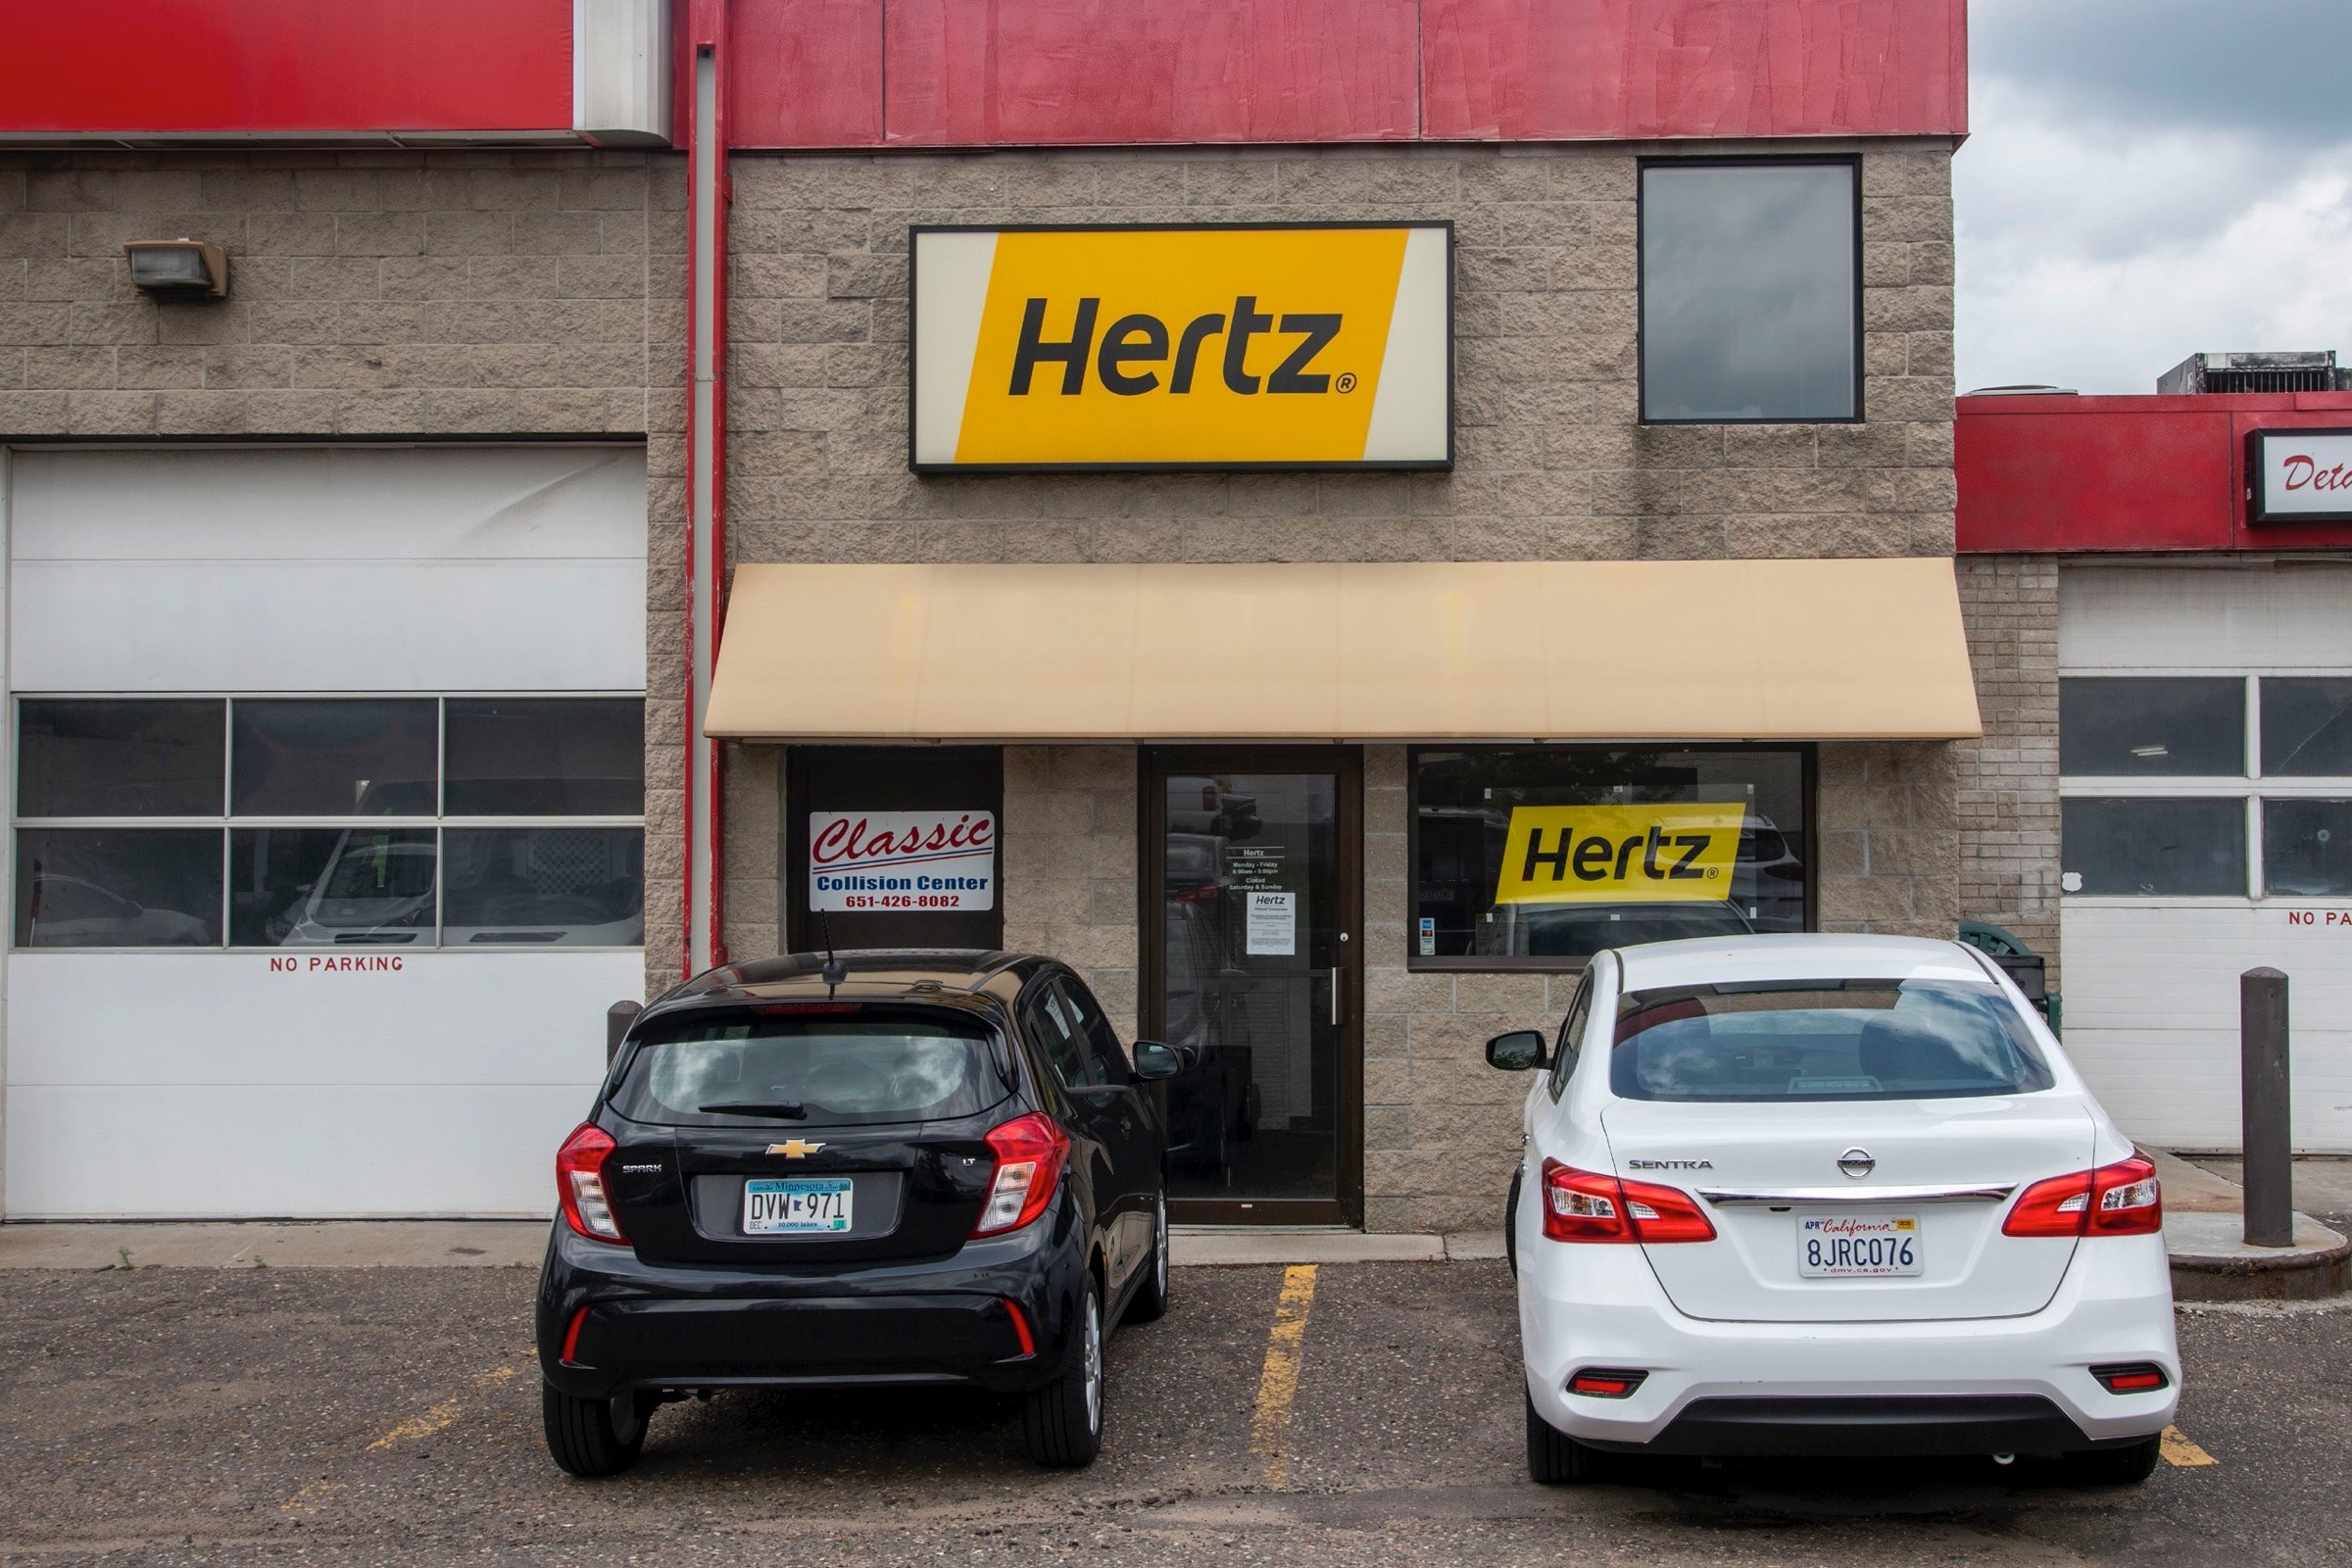 Two cars in front of a Hertz sign in a parking lot